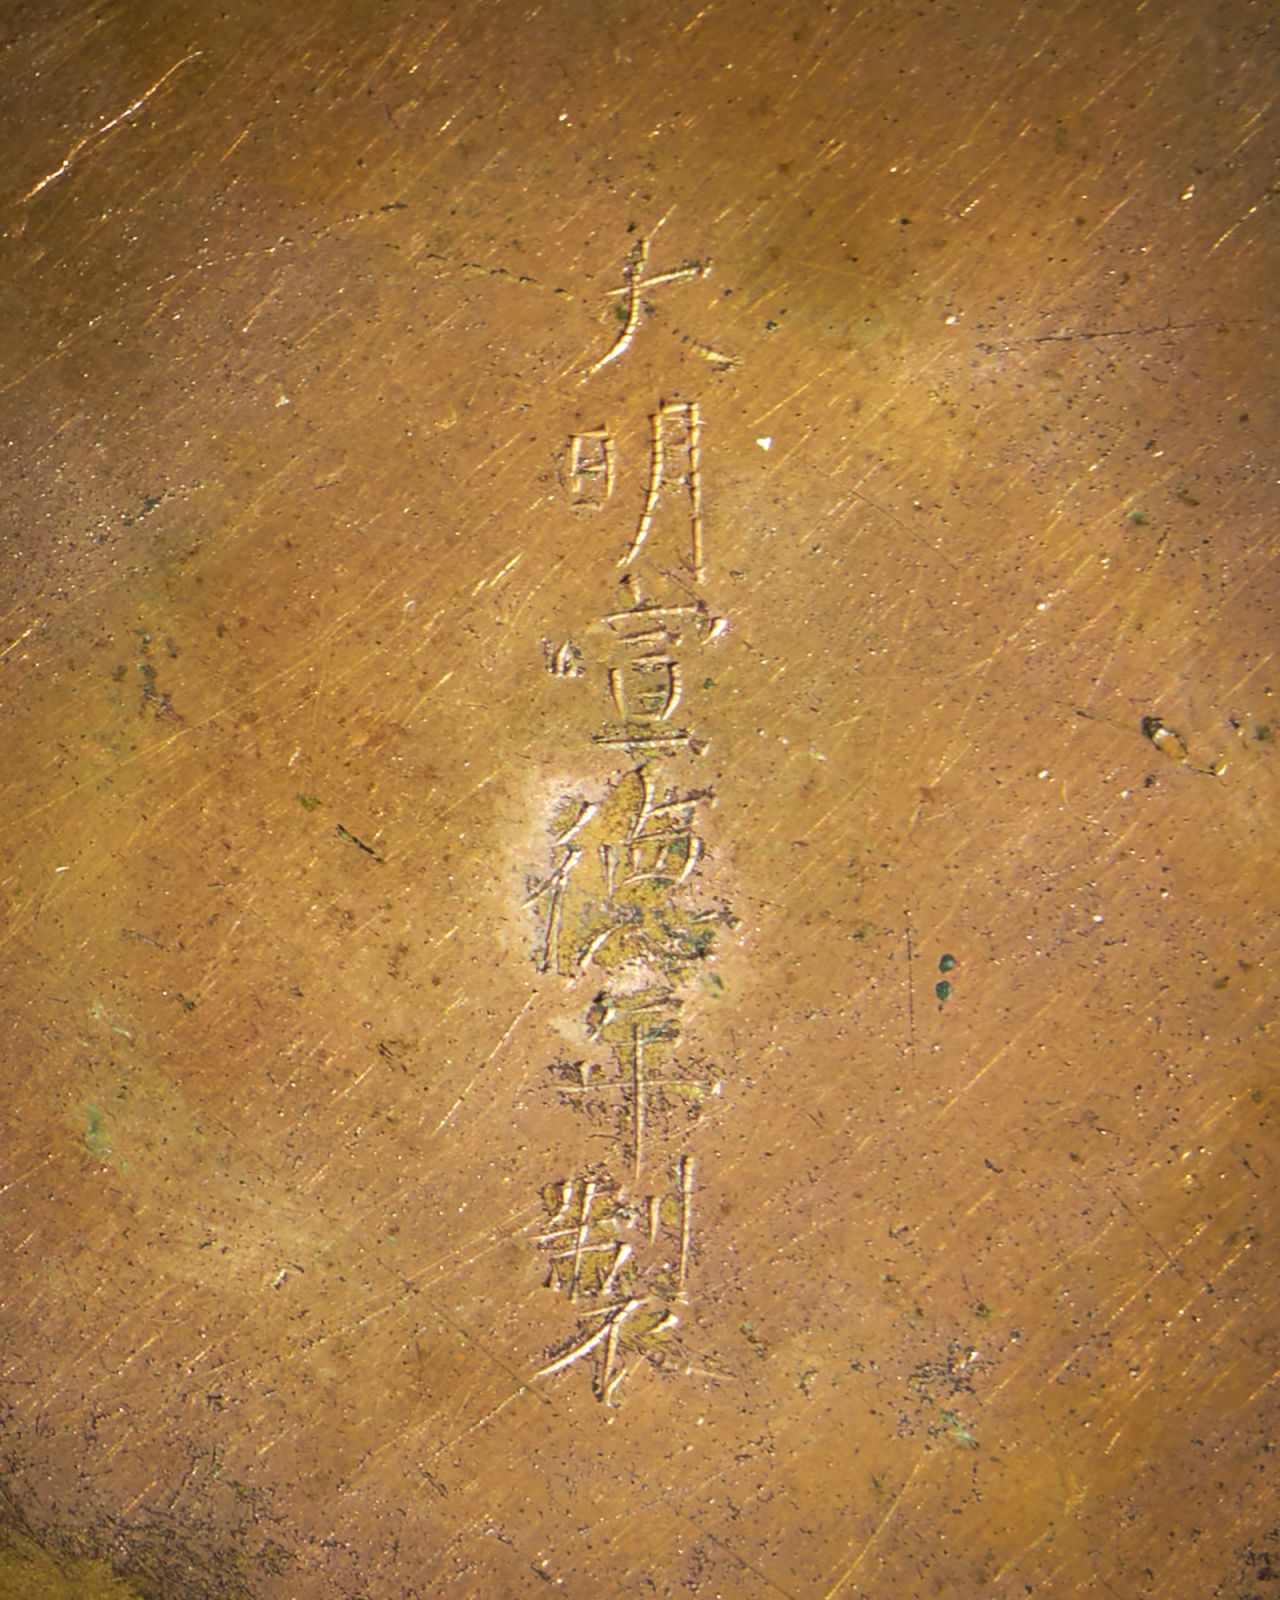 The box features inscriptions of Xuande, fifth emperor of the Ming dynasty.